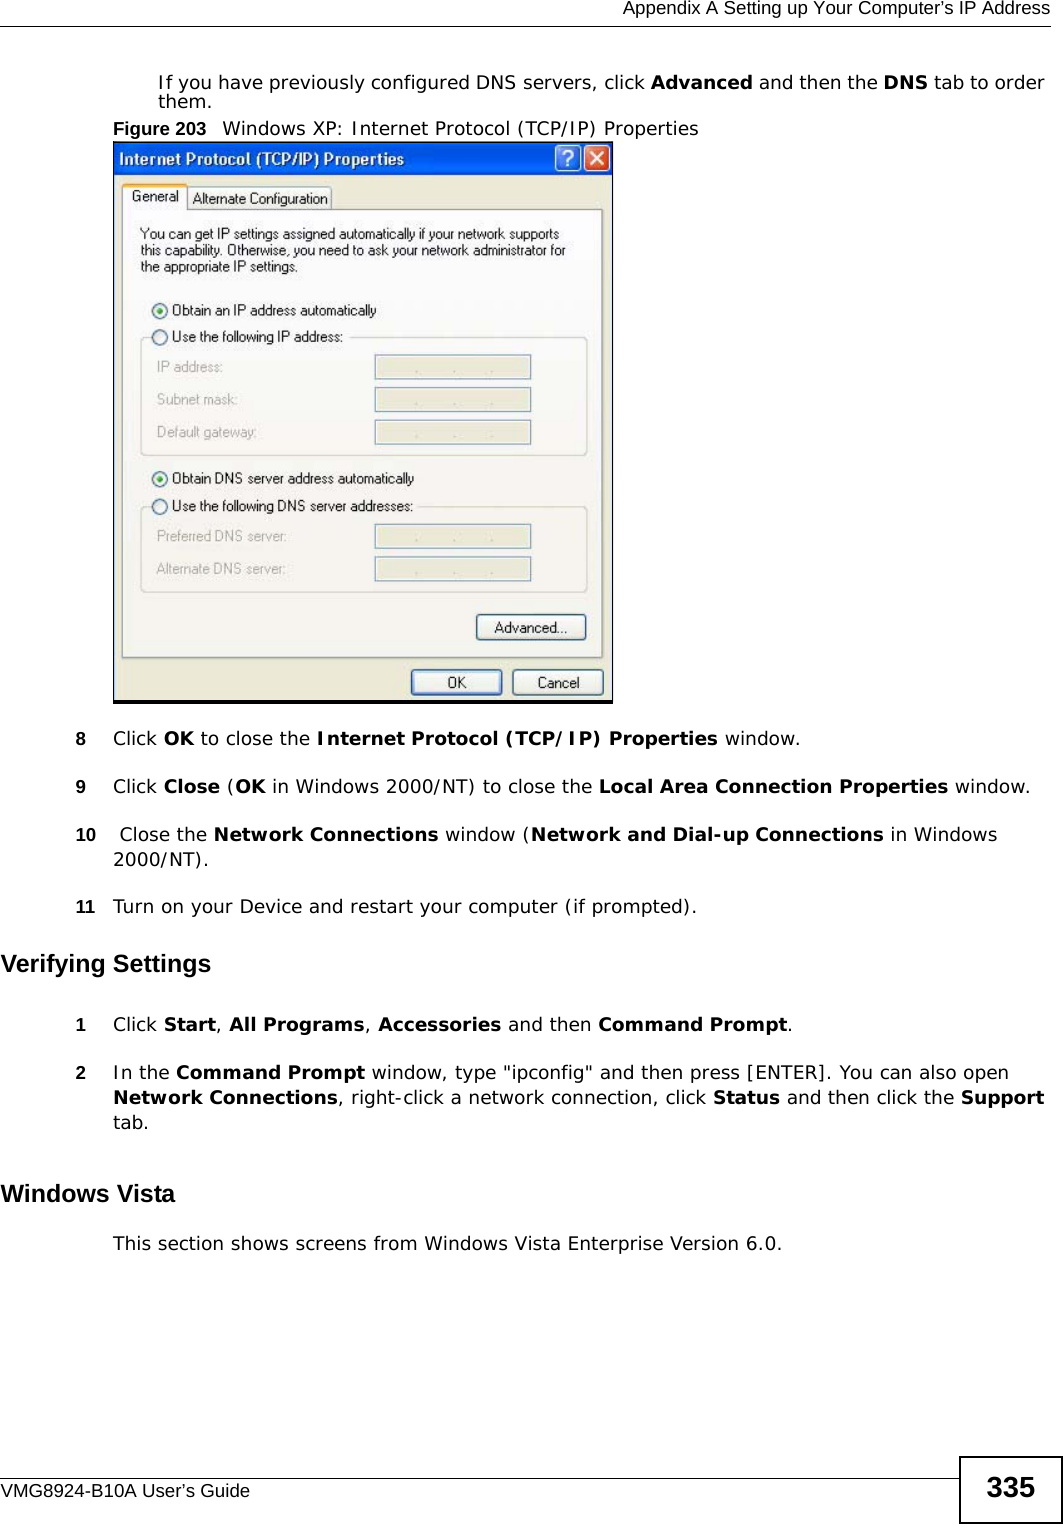  Appendix A Setting up Your Computer’s IP AddressVMG8924-B10A User’s Guide 335If you have previously configured DNS servers, click Advanced and then the DNS tab to order them.Figure 203   Windows XP: Internet Protocol (TCP/IP) Properties8Click OK to close the Internet Protocol (TCP/IP) Properties window.9Click Close (OK in Windows 2000/NT) to close the Local Area Connection Properties window.10  Close the Network Connections window (Network and Dial-up Connections in Windows 2000/NT).11 Turn on your Device and restart your computer (if prompted).Verifying Settings1Click Start, All Programs, Accessories and then Command Prompt.2In the Command Prompt window, type &quot;ipconfig&quot; and then press [ENTER]. You can also open Network Connections, right-click a network connection, click Status and then click the Support tab.Windows VistaThis section shows screens from Windows Vista Enterprise Version 6.0.